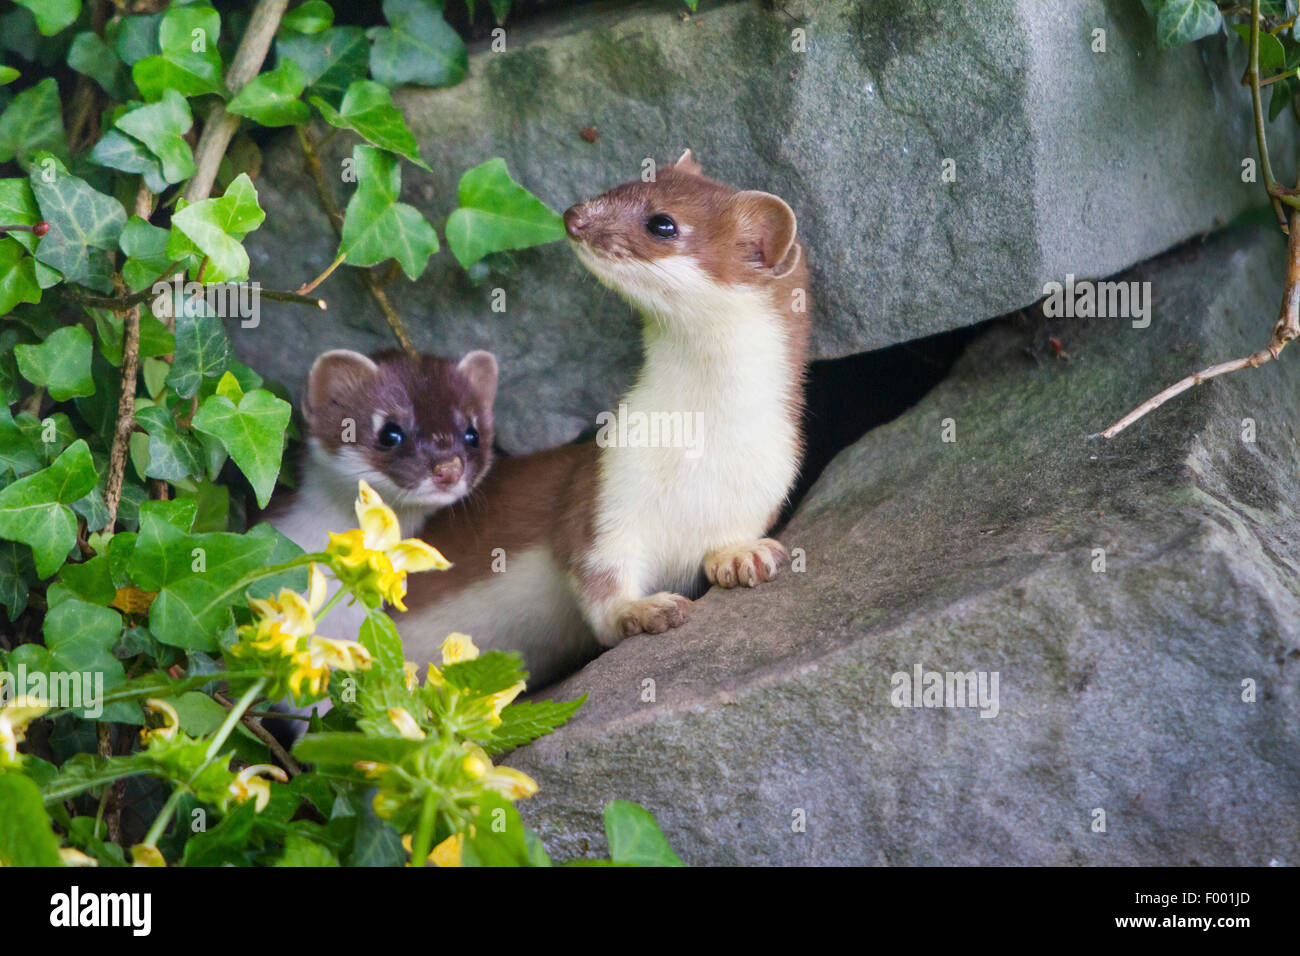 Ermine, Stoat, Short-tailed weasel (Mustela erminea), two ermines looking out of an old sandstone wall, Switzerland, Sankt Gallen Stock Photo